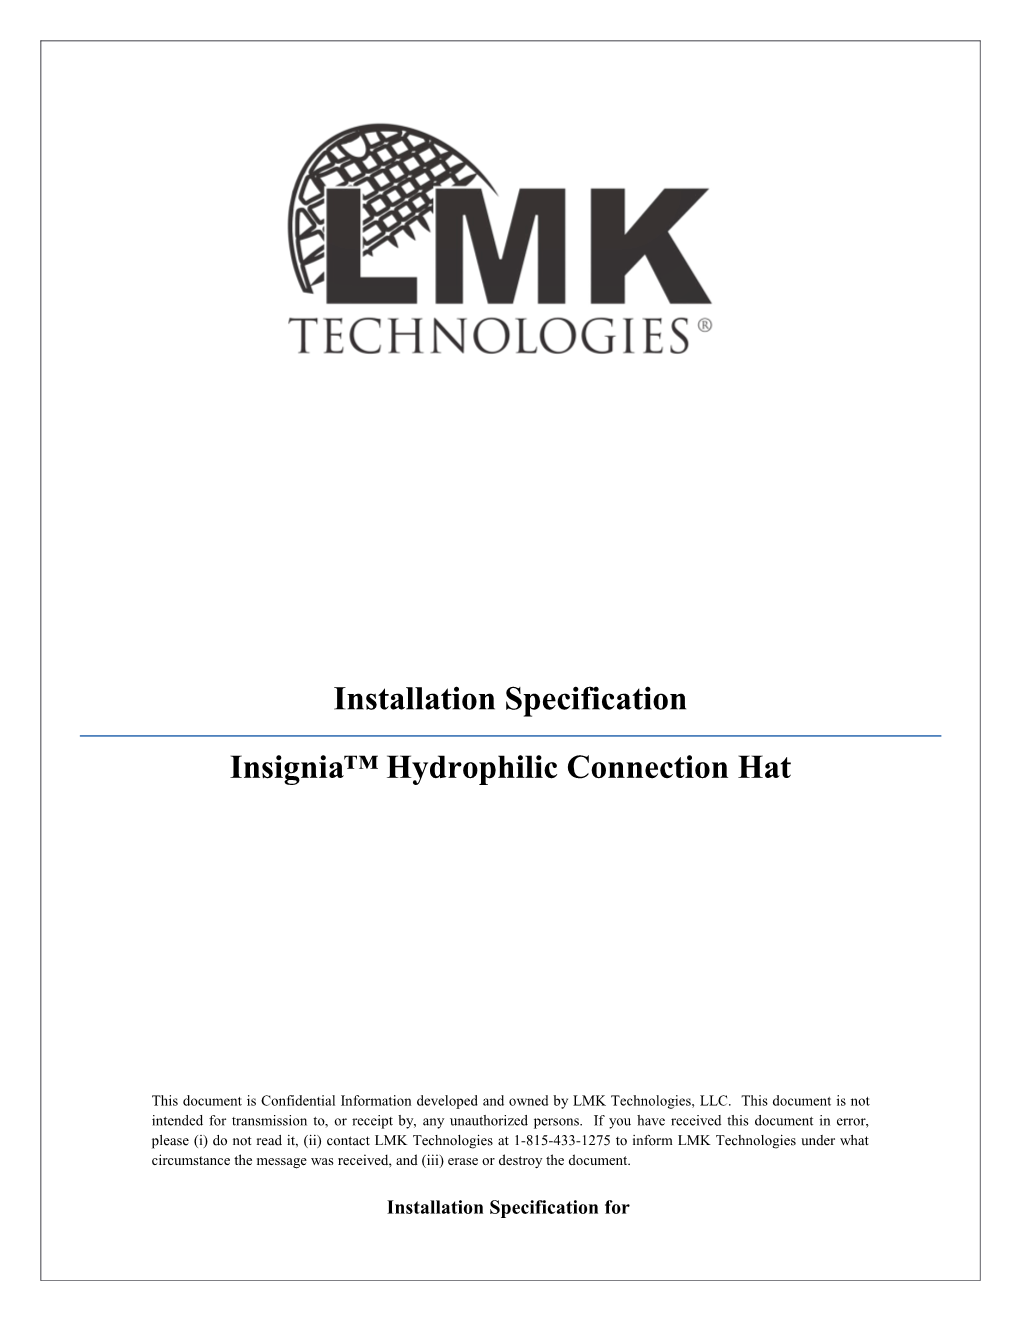 Insignia Hydrophilic Connection Hat